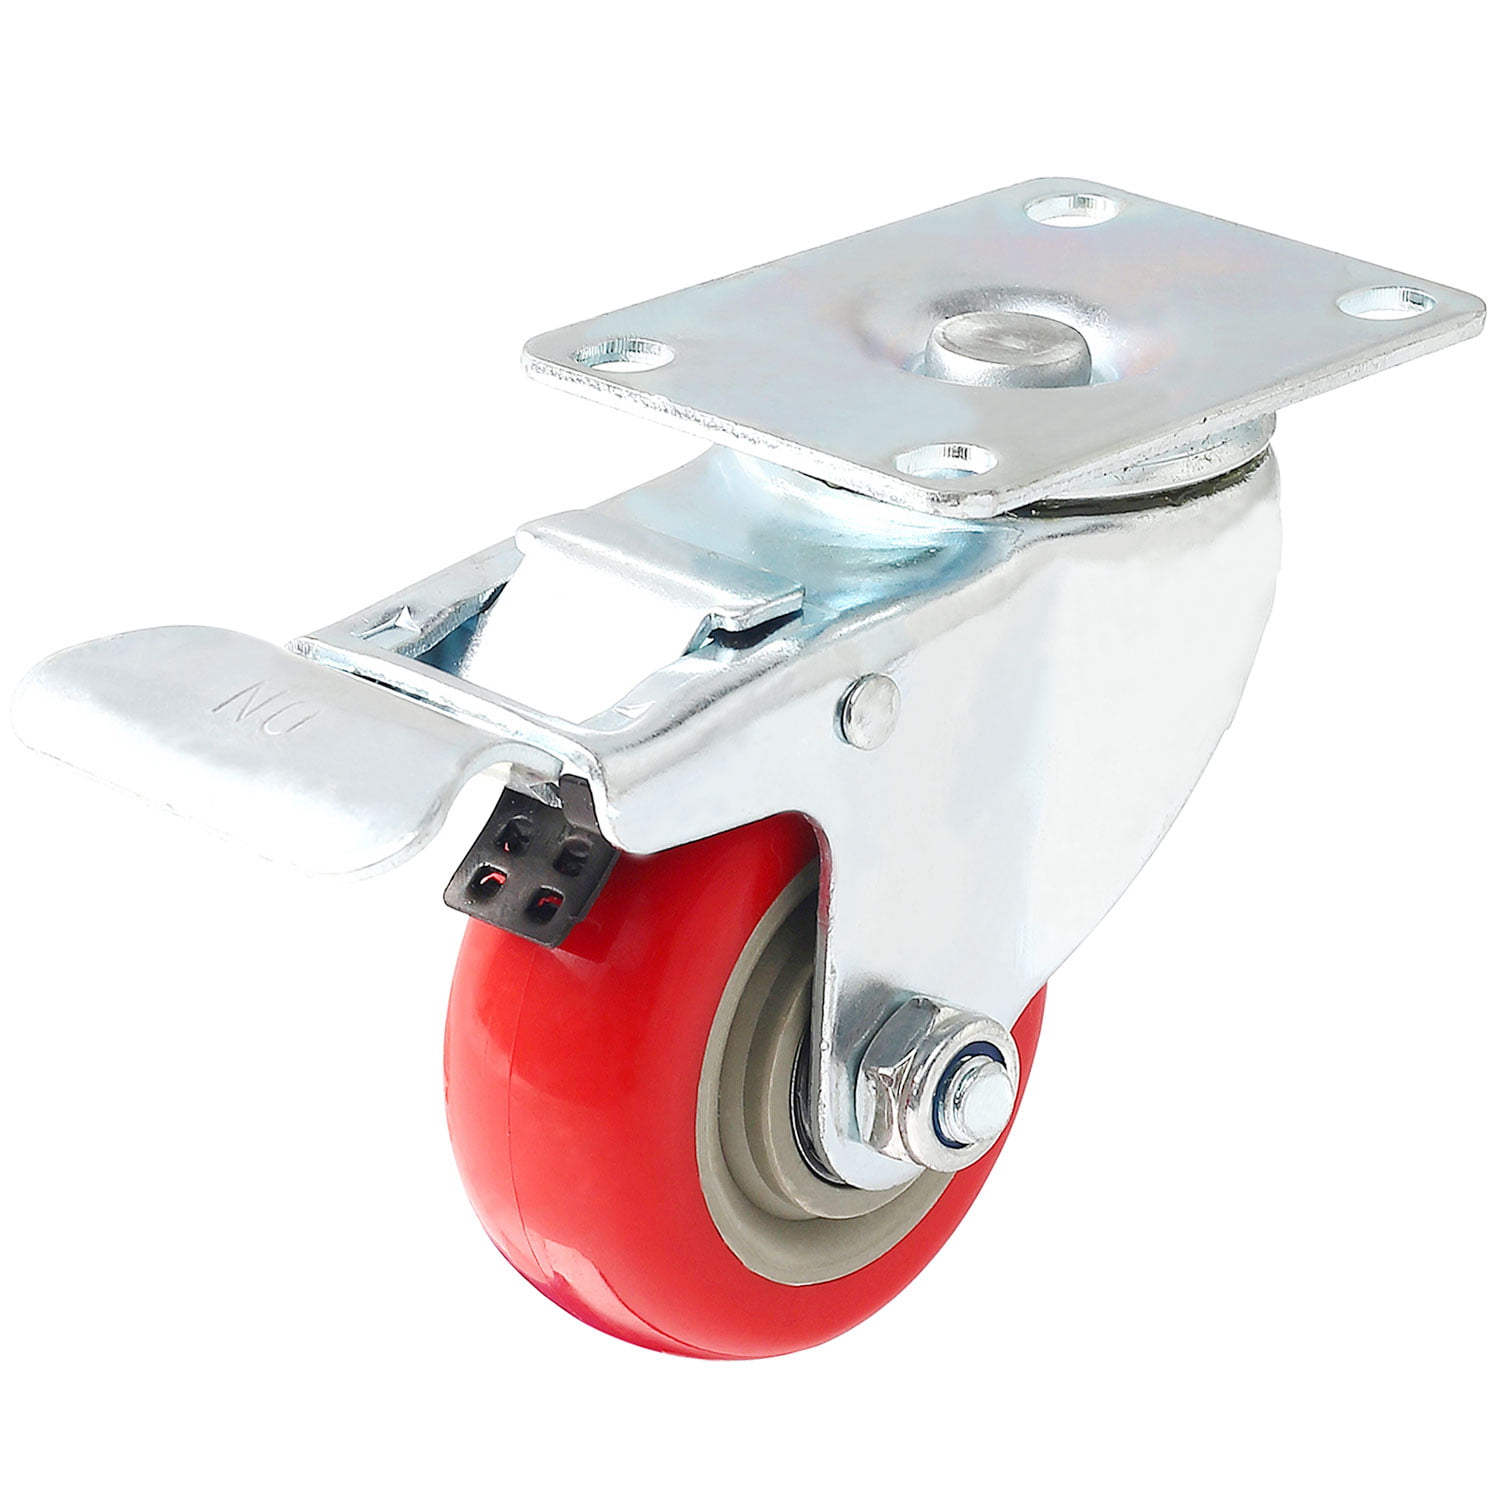 Moving Drawers WSWJ 1.5 Furniture Casters,Polyurethane Wheels,Swivel Castor Wheels,wear Resistant,360°Swivel,Suitable for Flower Stands,Small Cabinets